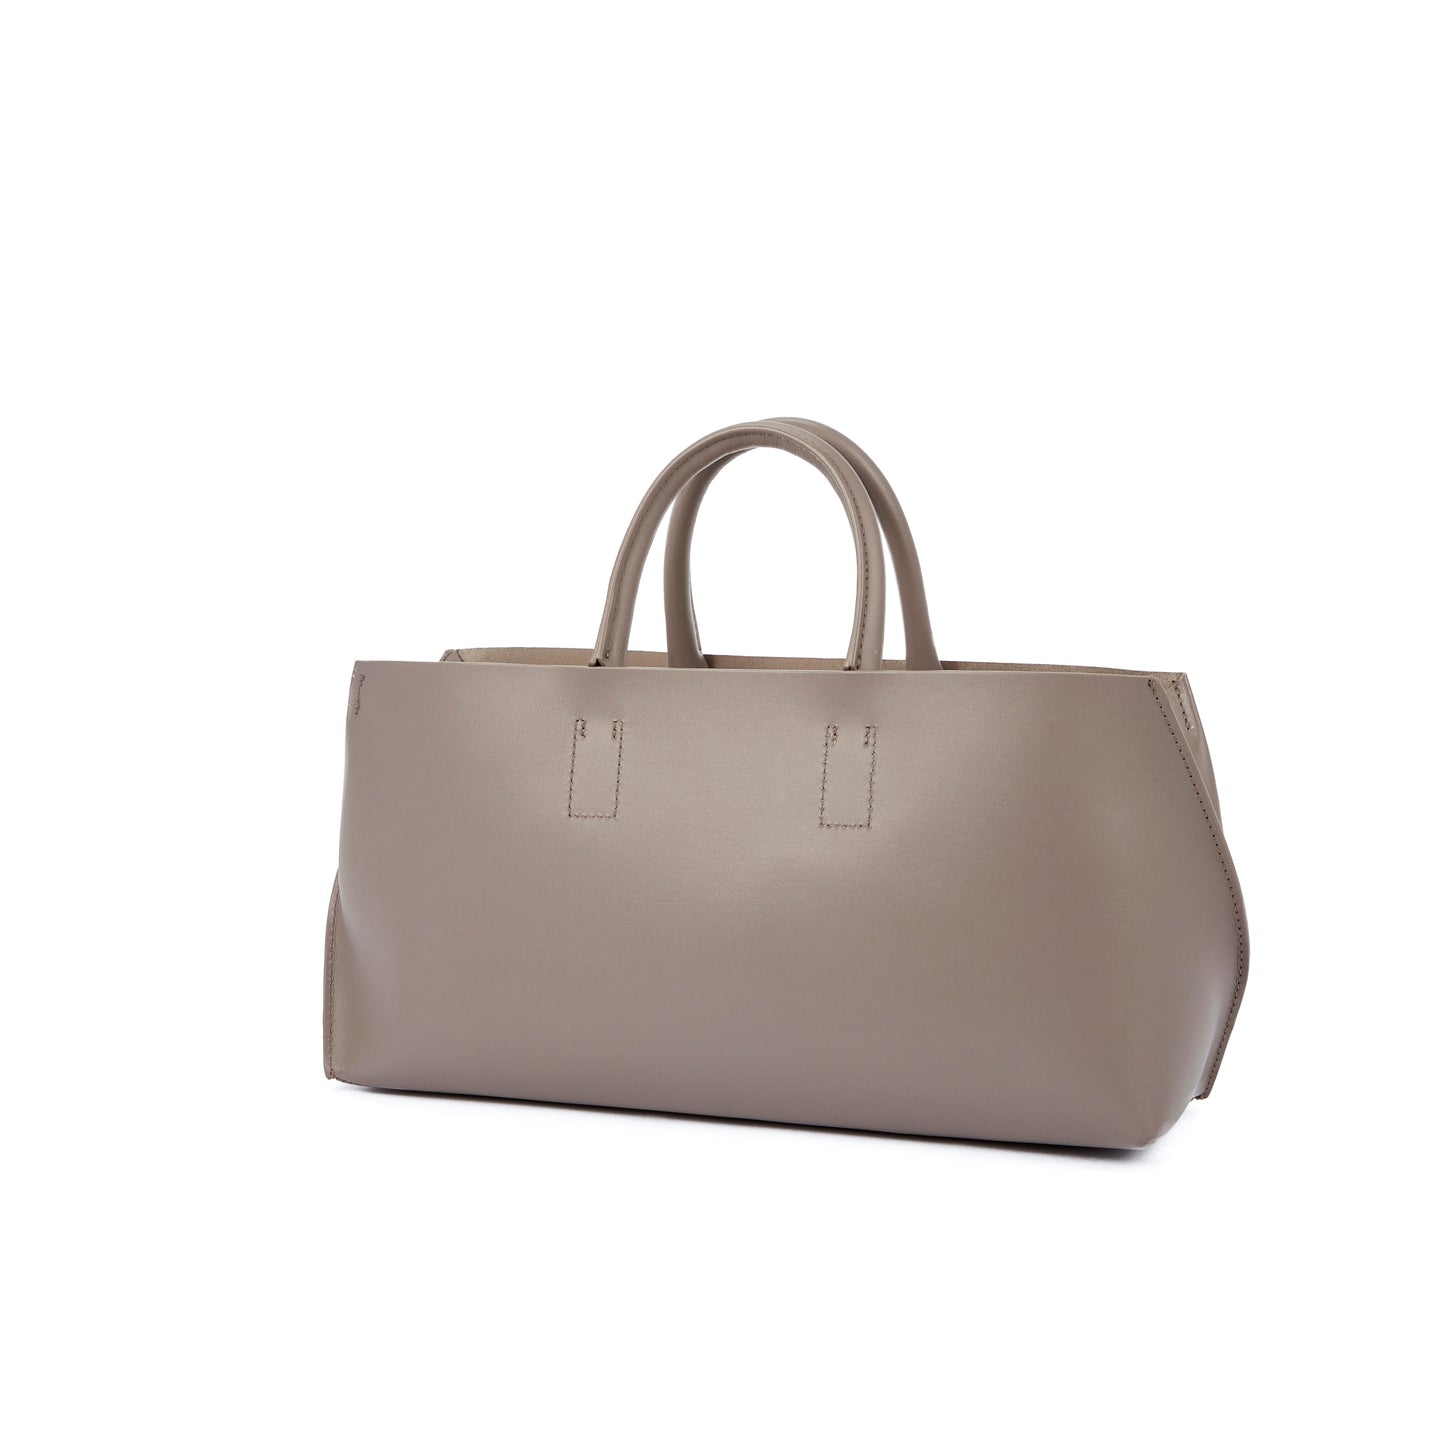 【Courtney Orla / コートニーオーラ】SLOPE wine tote S Smooth L. - Taupe